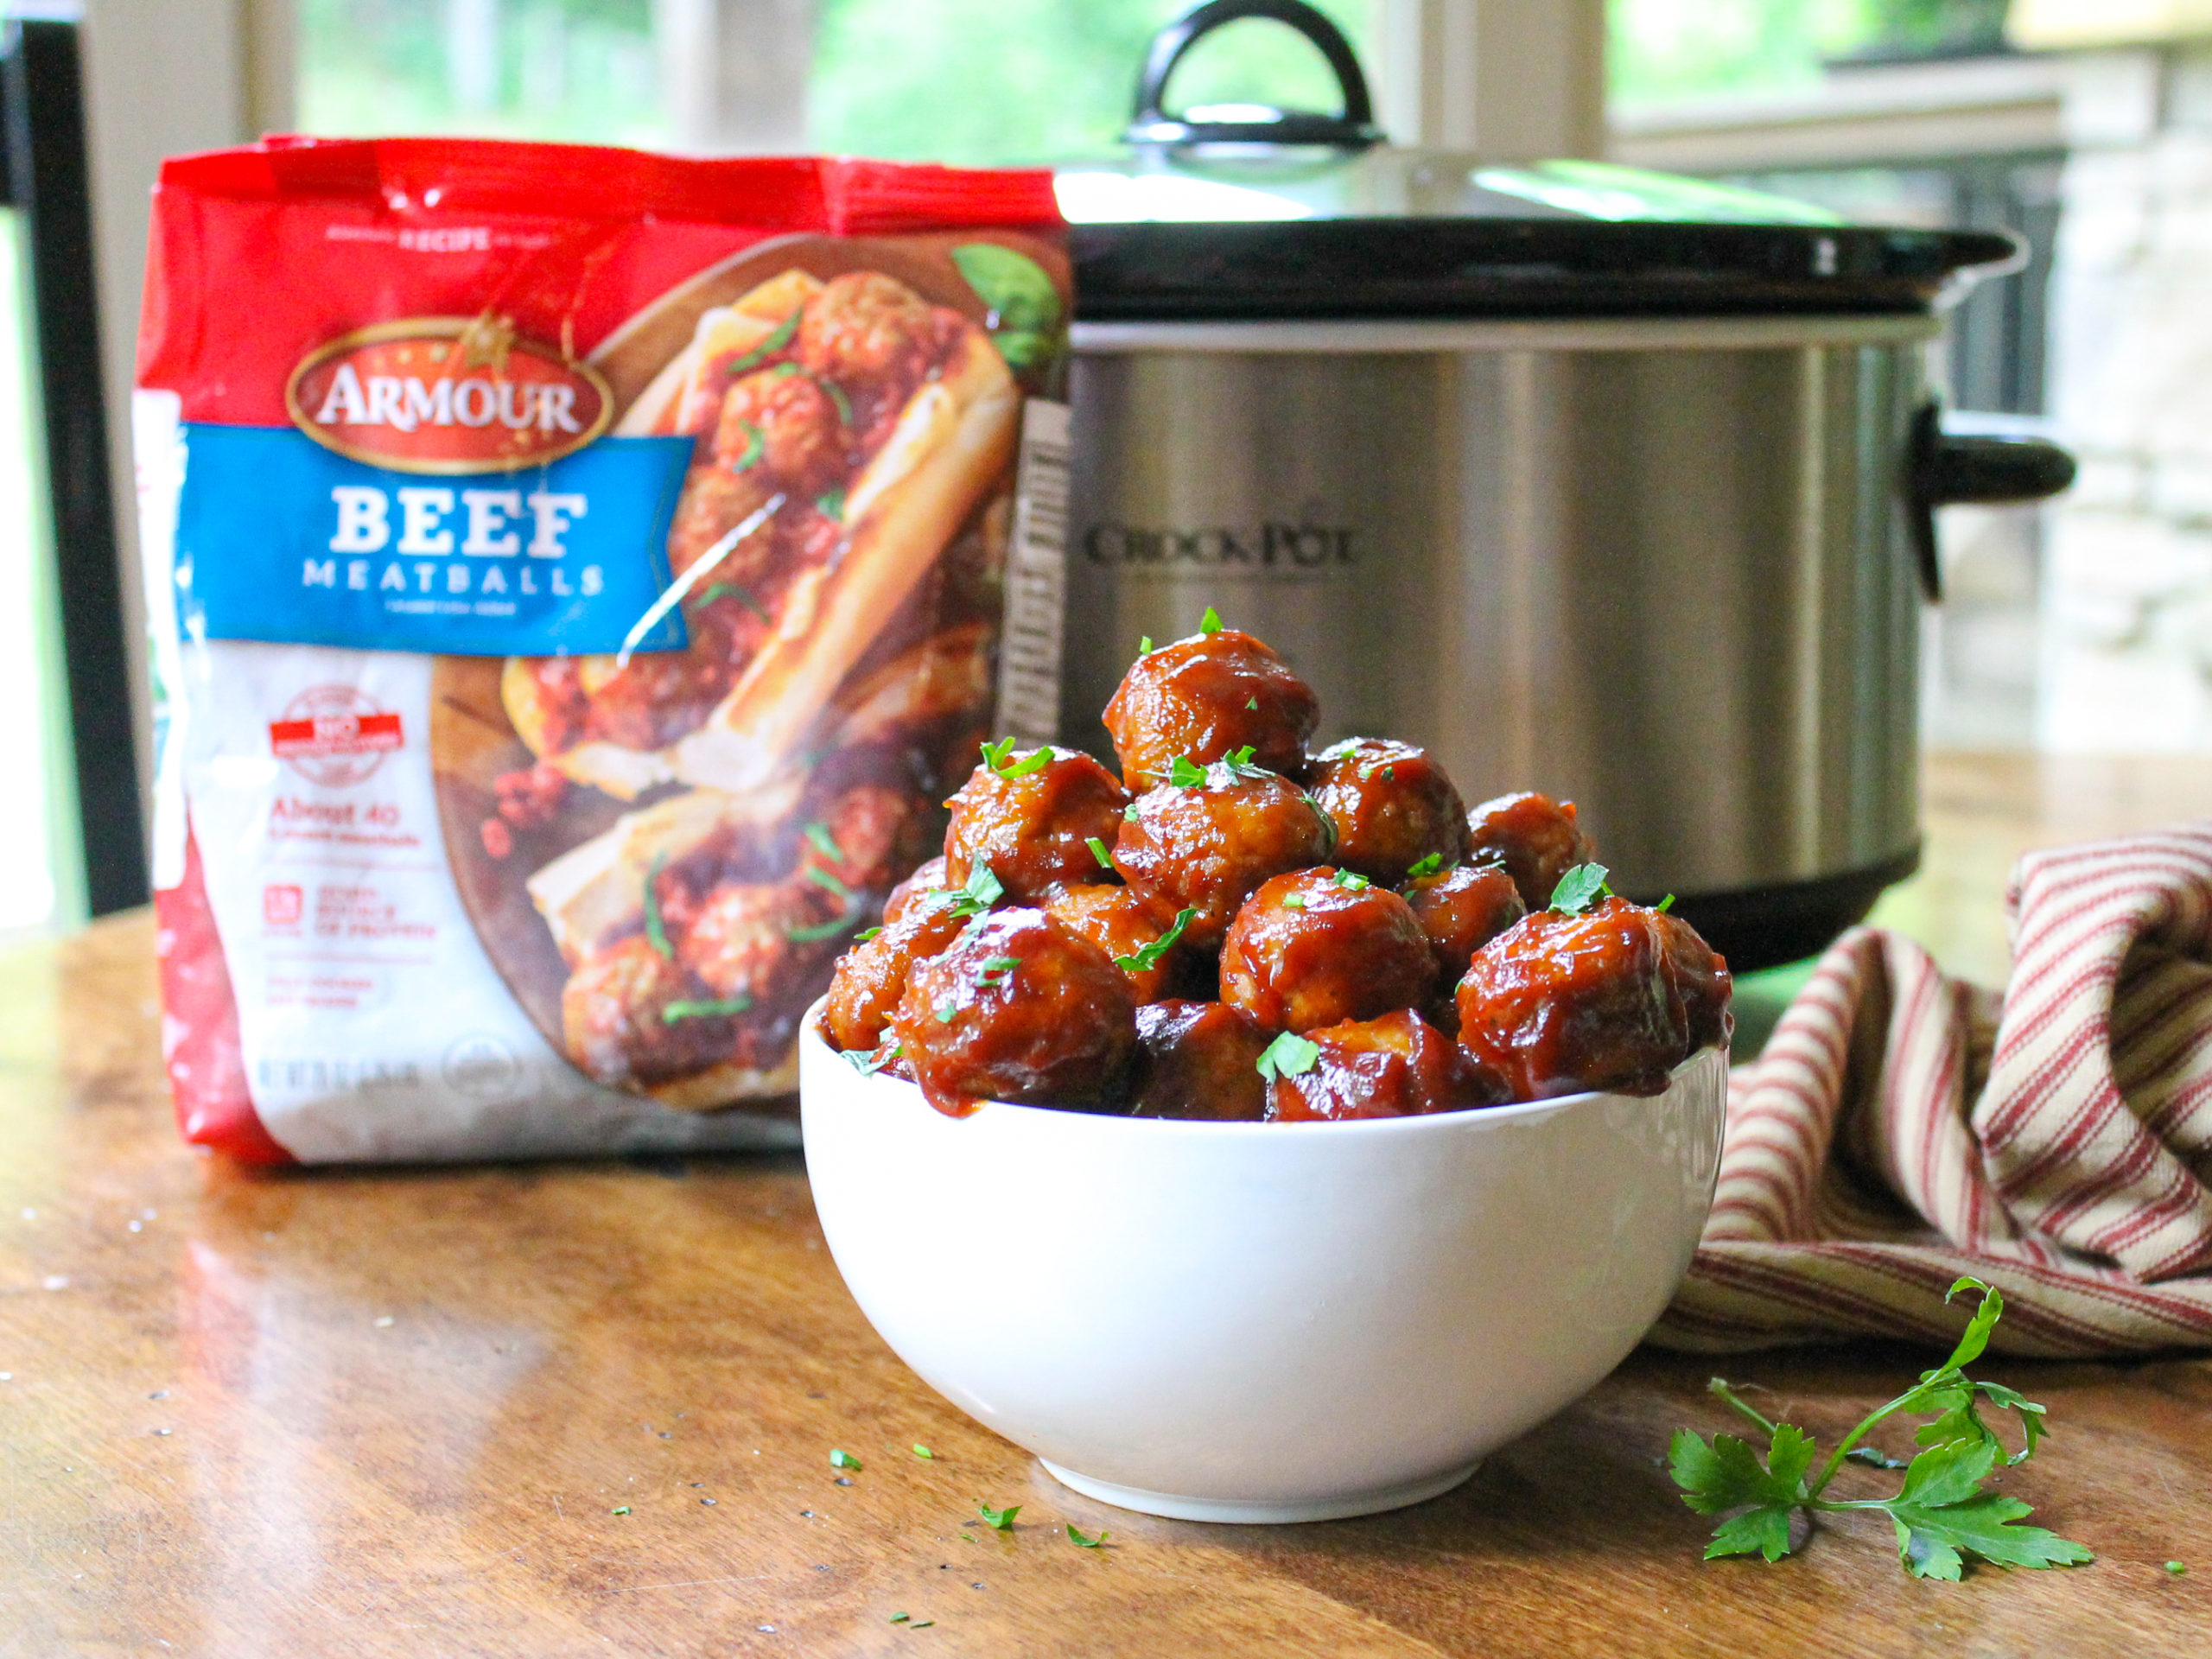 Serve Up Great Taste At Your Holiday Gathering - Serve Up Armour Meatballs & Save Now At Publix on I Heart Publix 1